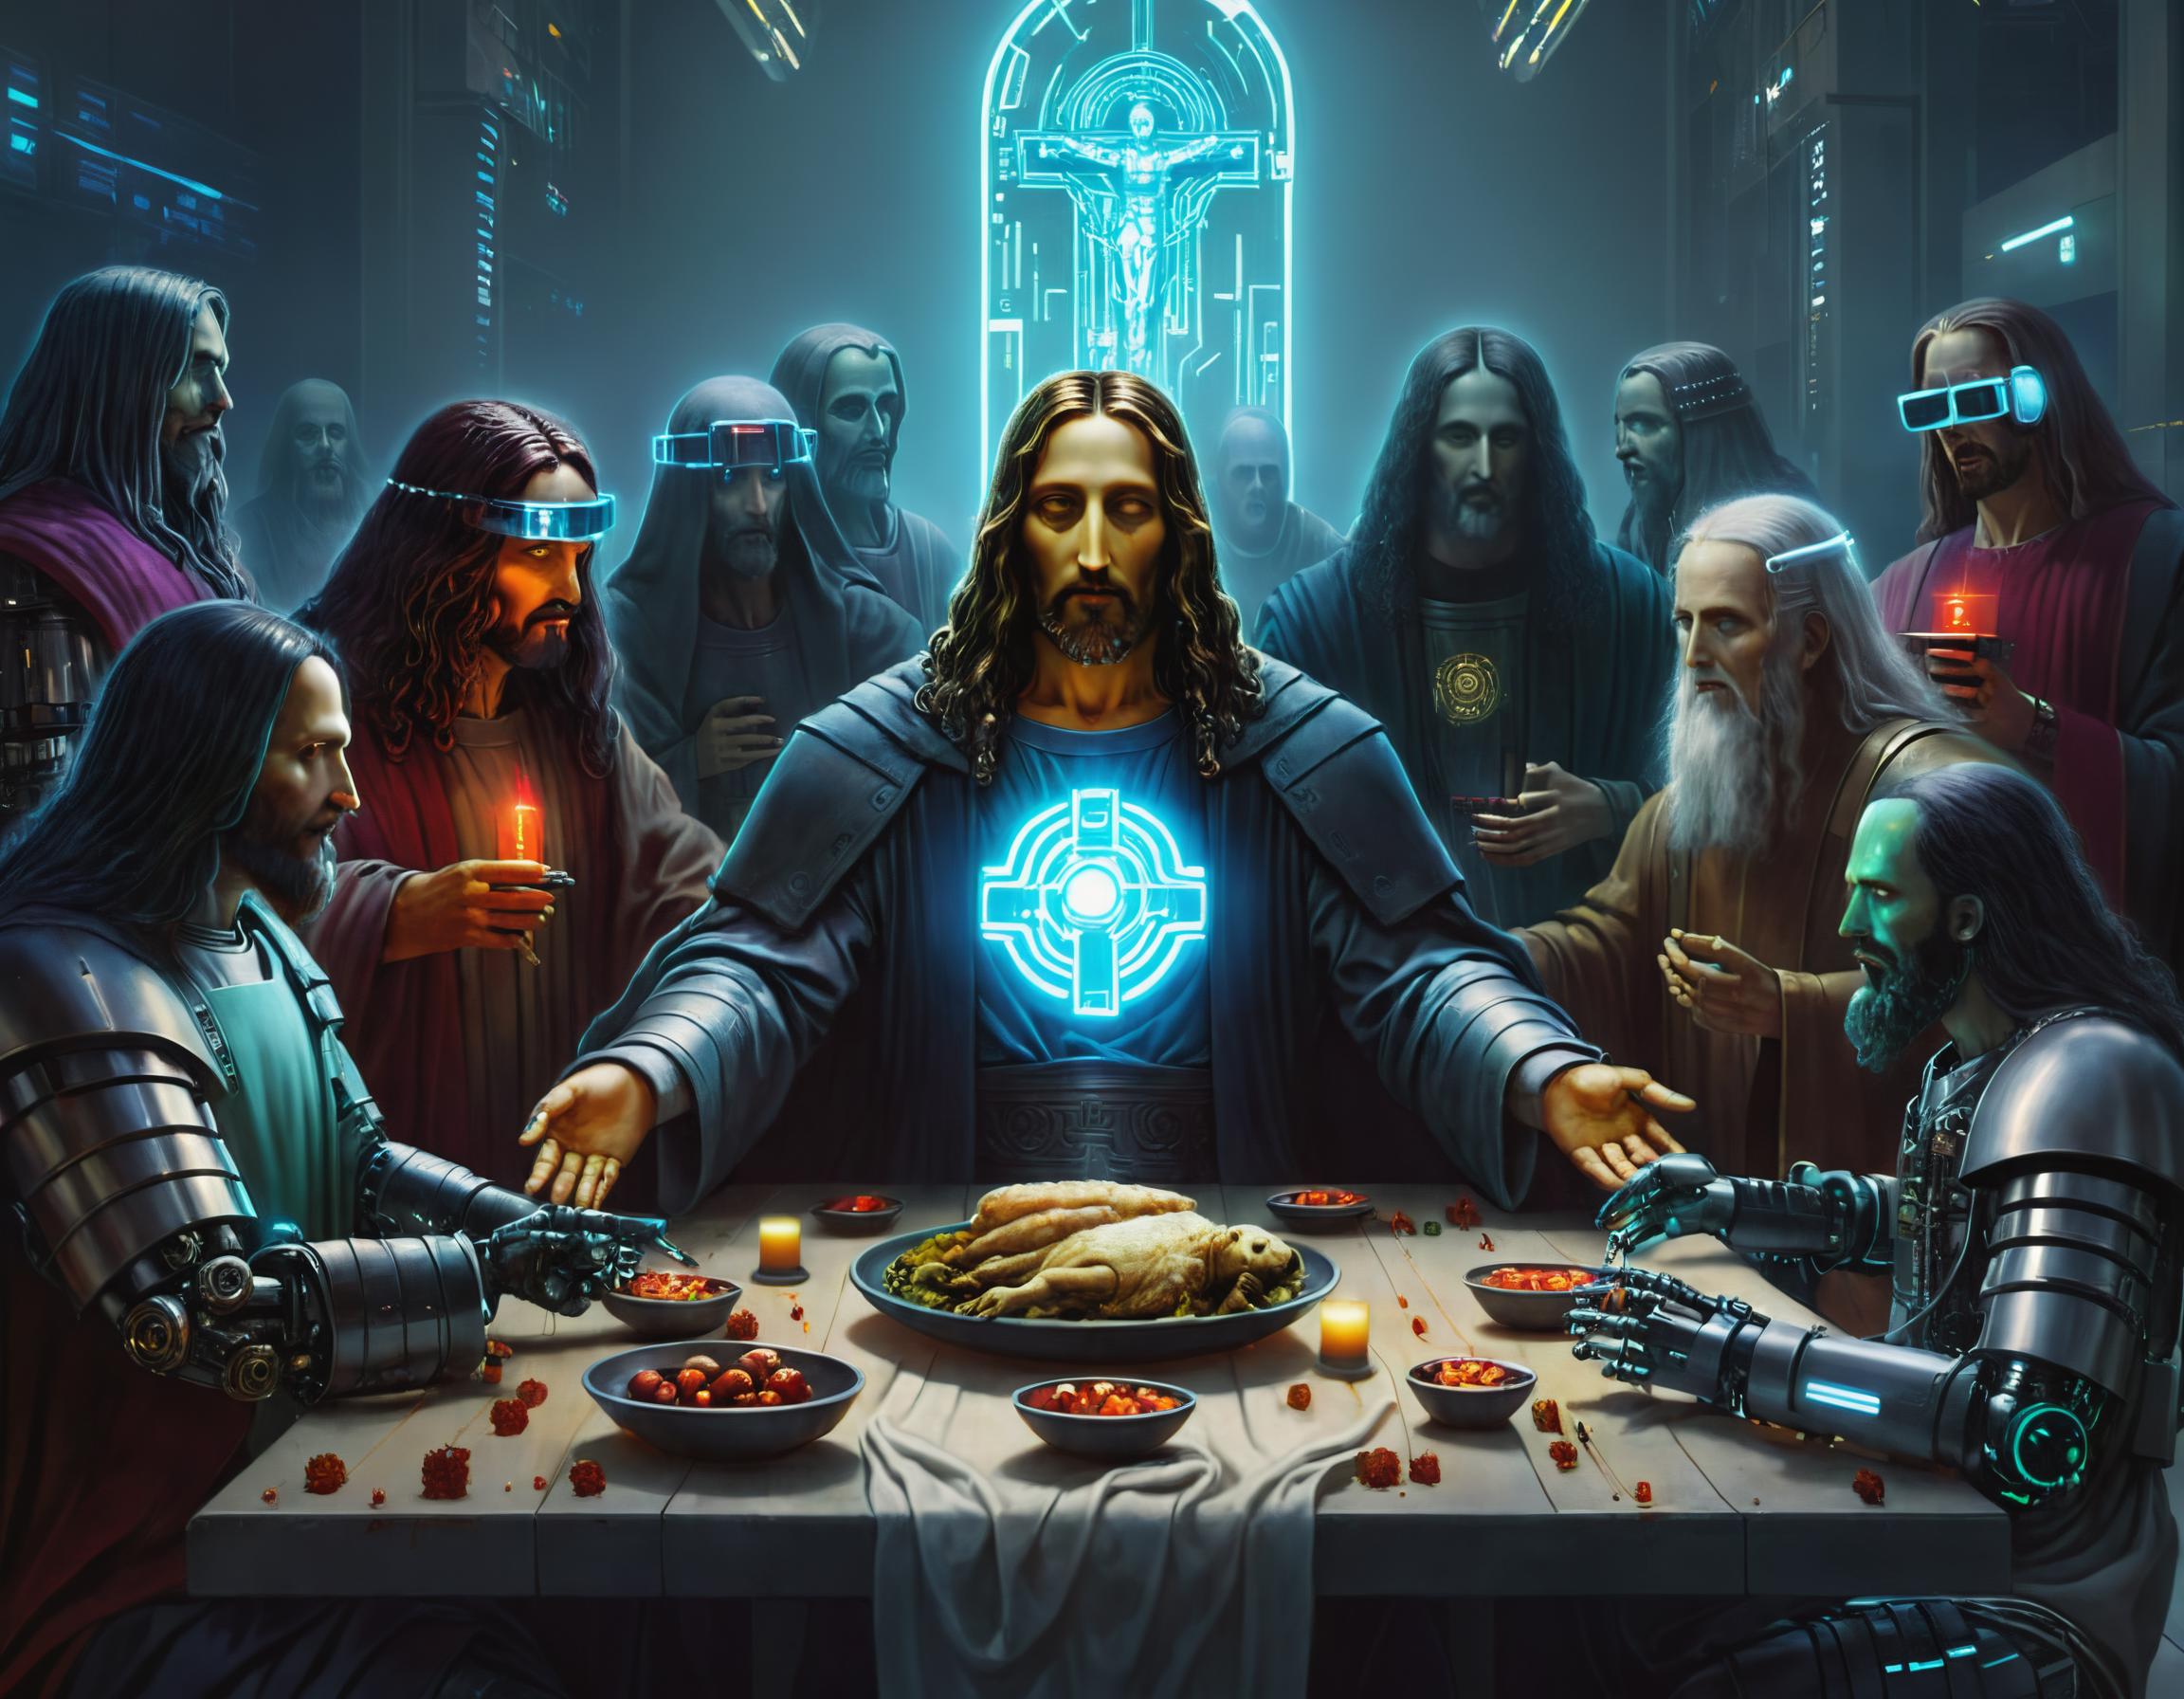 A digital painting of Jesus and his disciples having a feast, with a blue cross in the center of the table.